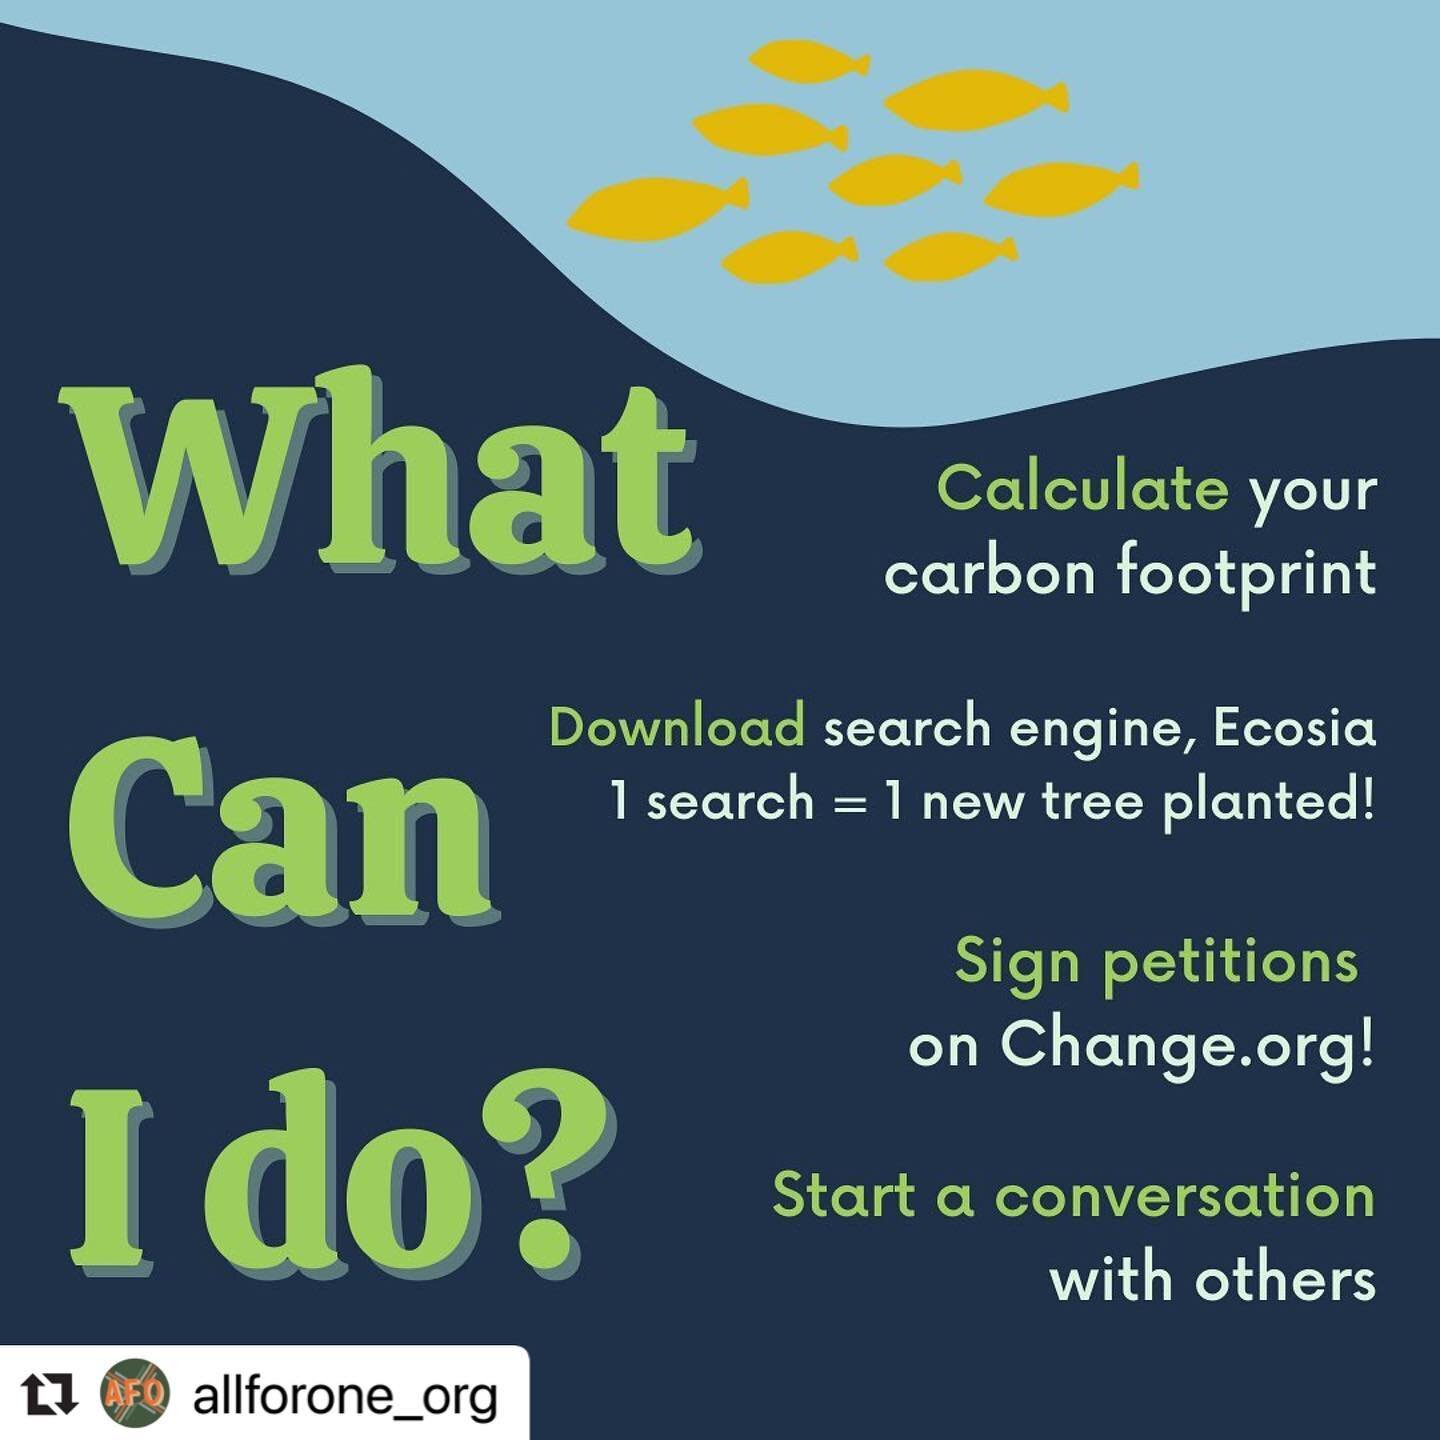 #Repost @allforone_org with @make_repost
・・・
In honor of earth day we want to post a quick info graphic on carbon emission in collaboration with @thisisclimatenow . HAPPY EARTH DAY EVERYONE 
&bull;
&bull;
&bull;
&bull;
&bull;
&bull;
&bull;
&bull;
&bu